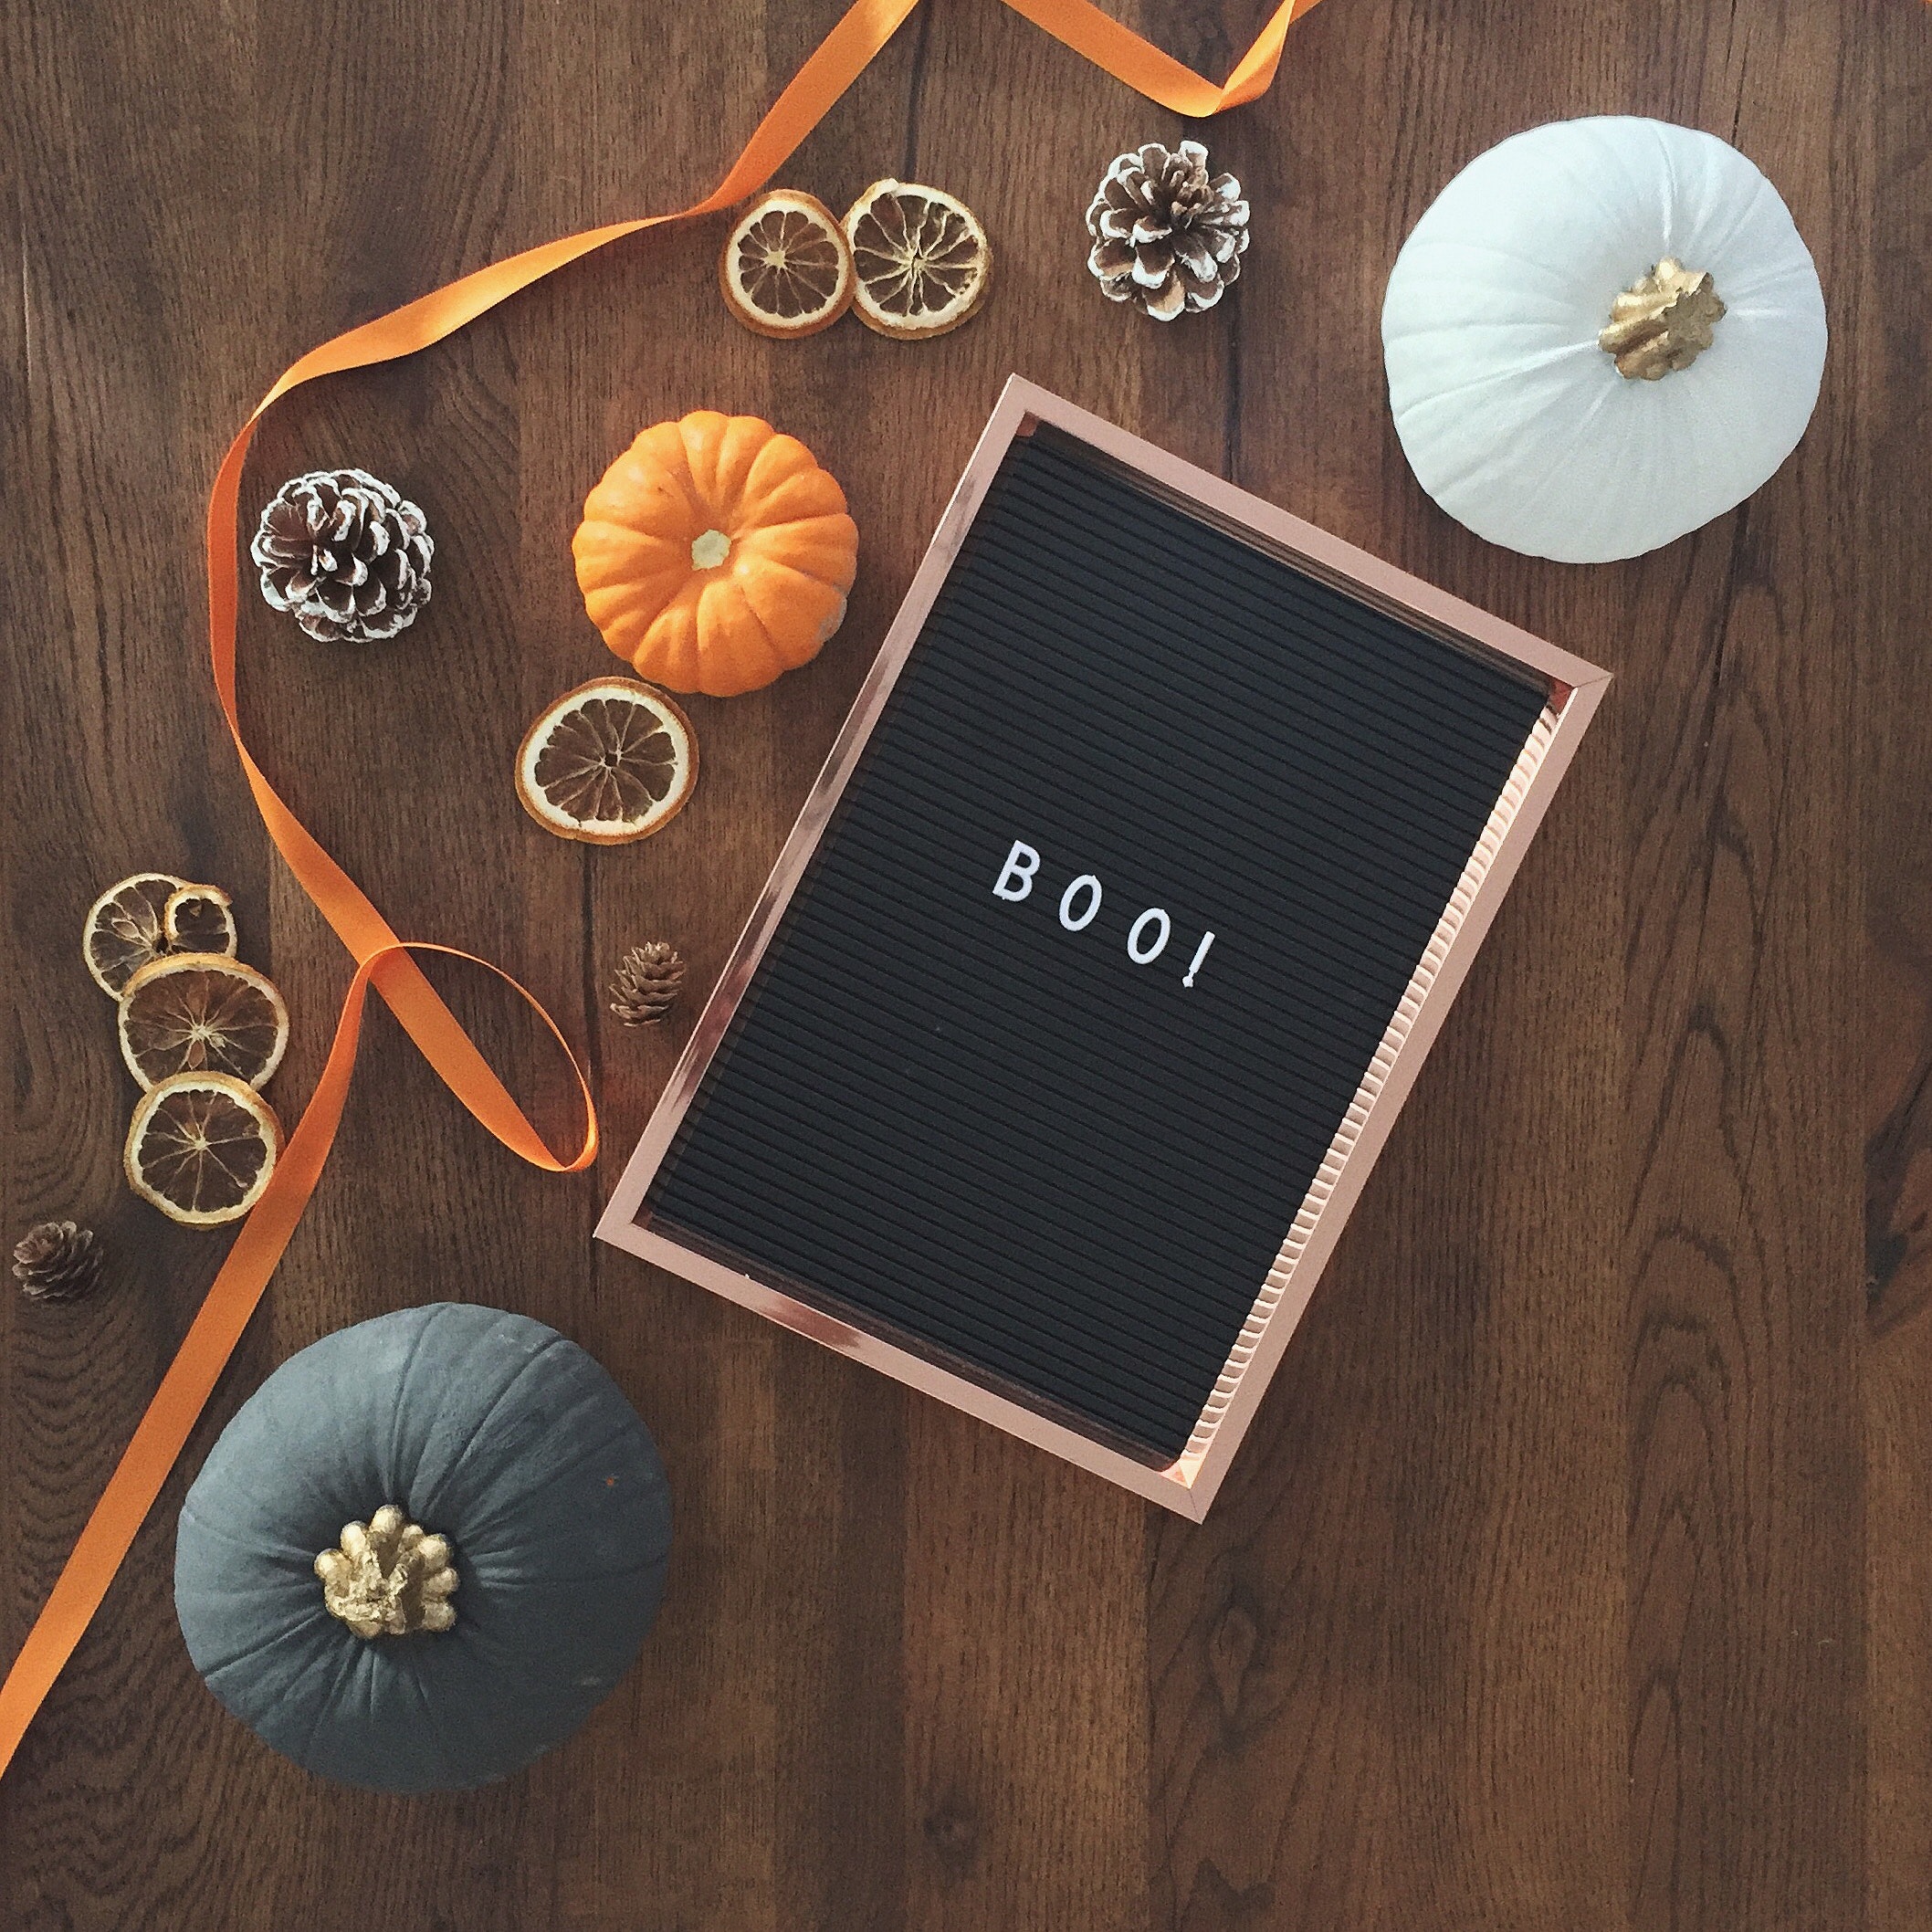 Boo sign